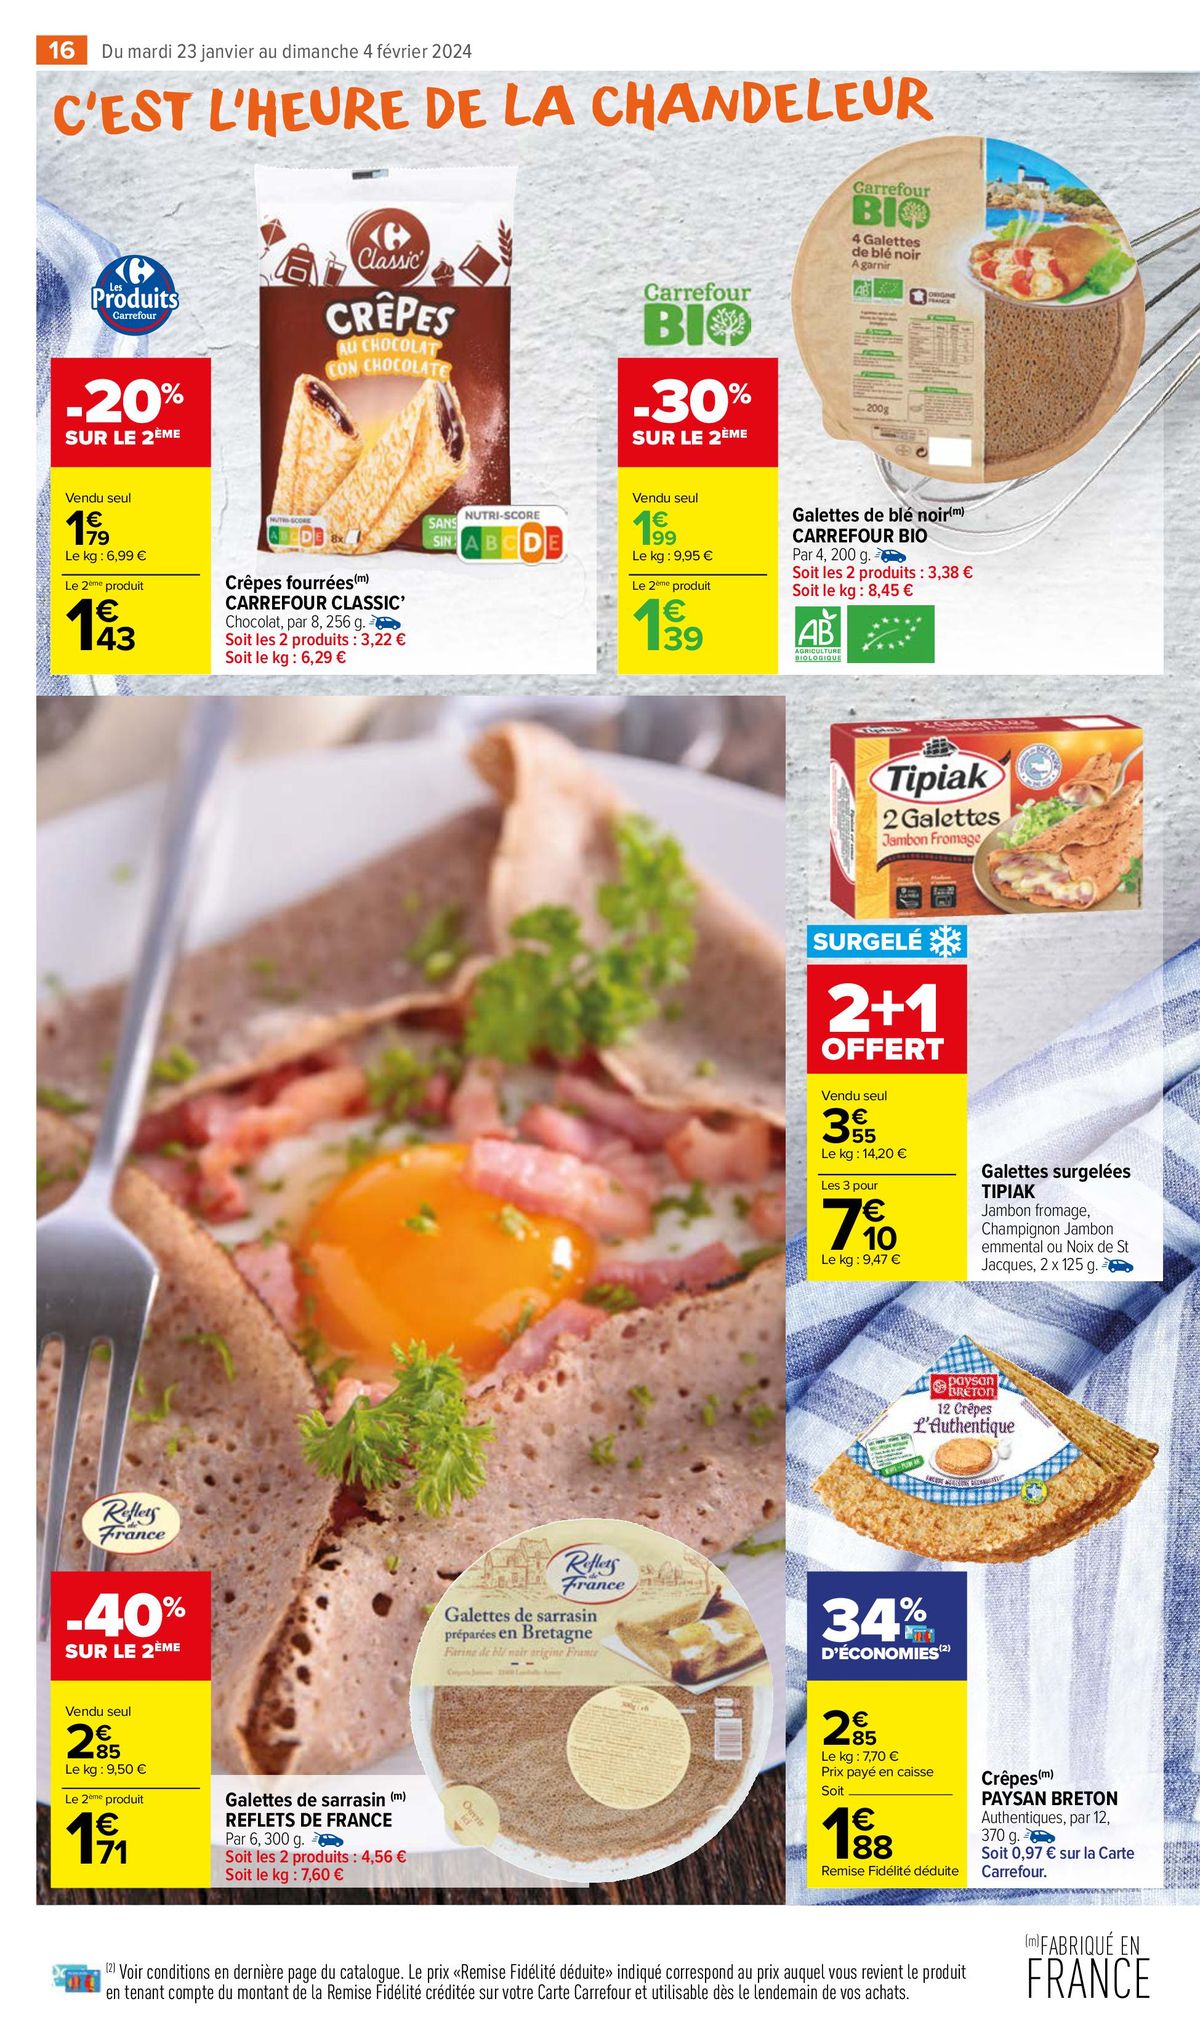 Catalogue Crêpes Party !, page 00018